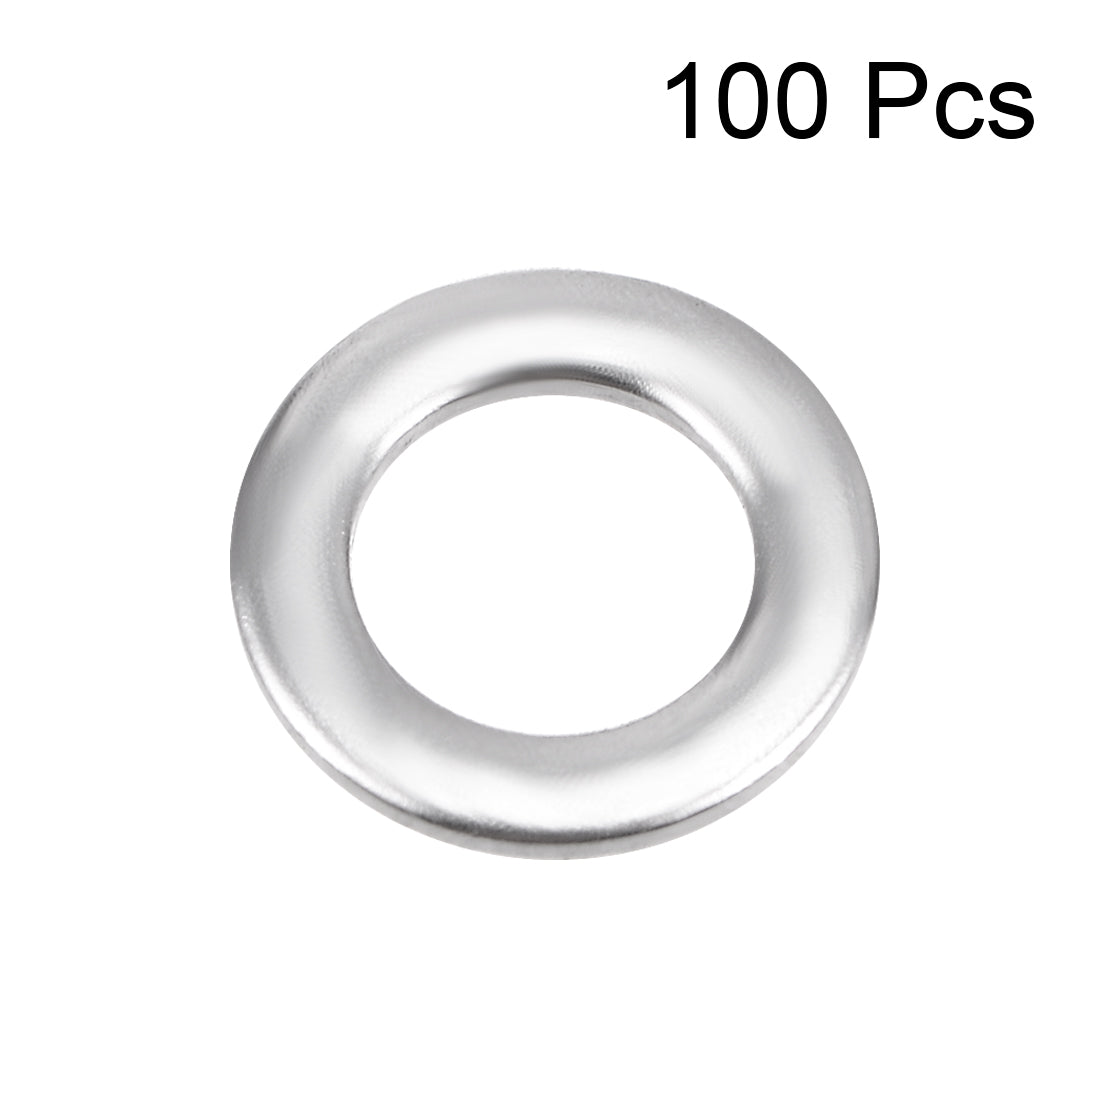 uxcell Uxcell 100 Pcs 7mm x 4mm x 0.8mm 304 Stainless Steel Flat Washer for Screw Bolt